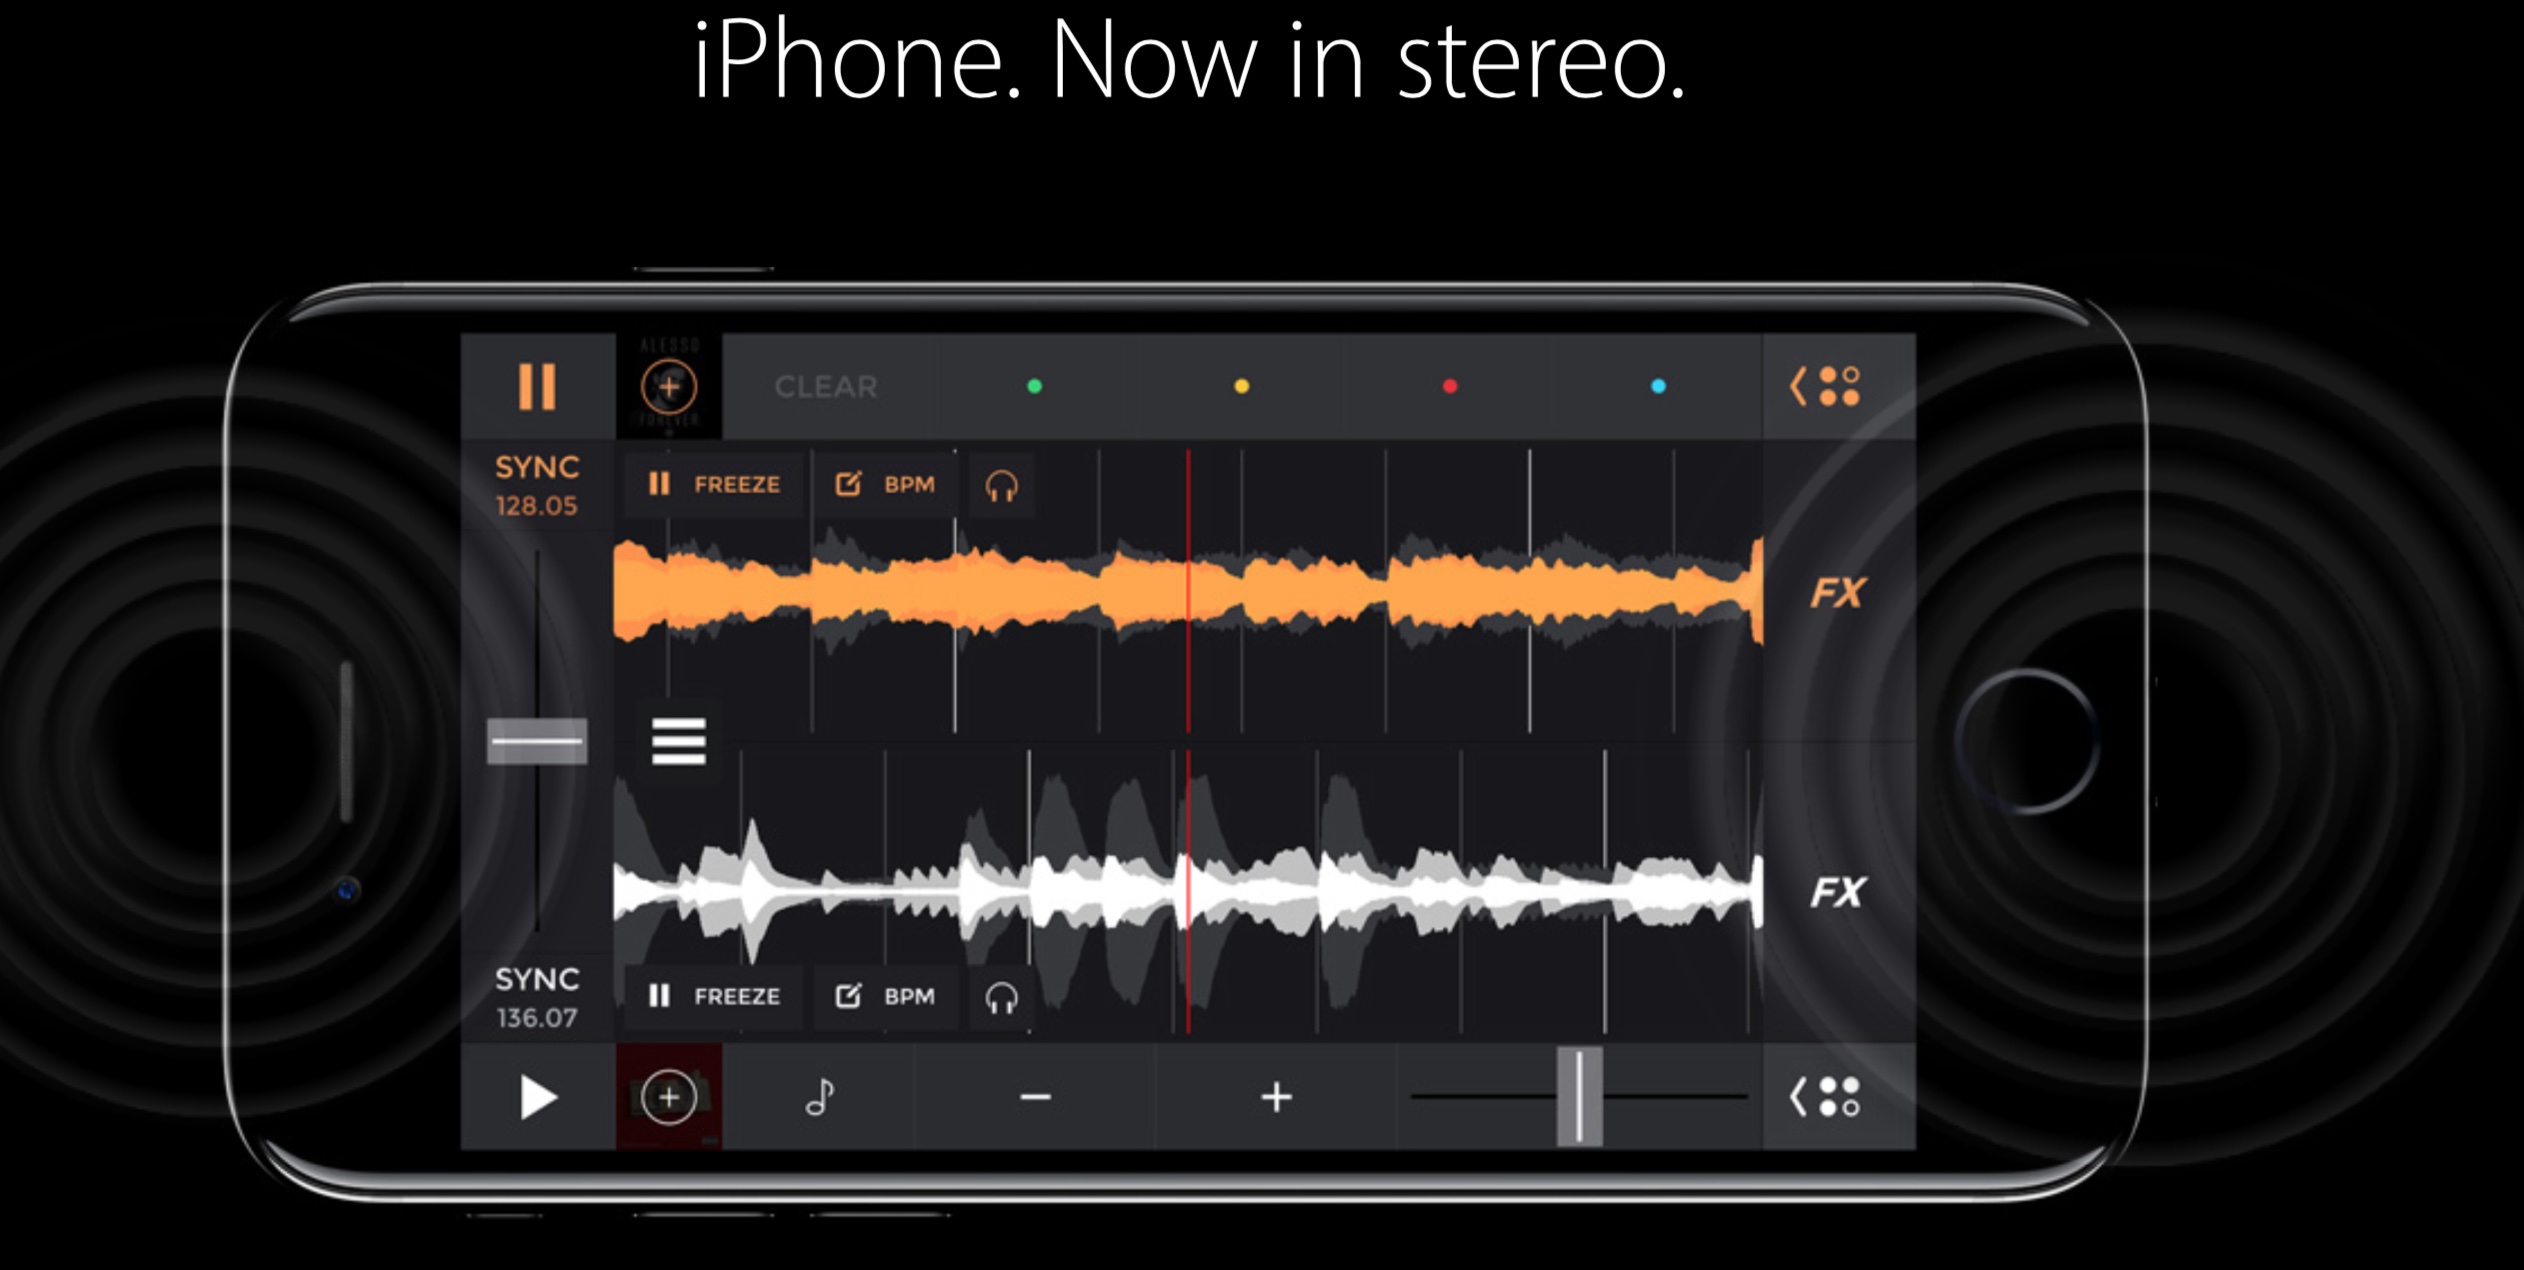 iphone-7-now-in-stereo-image-001